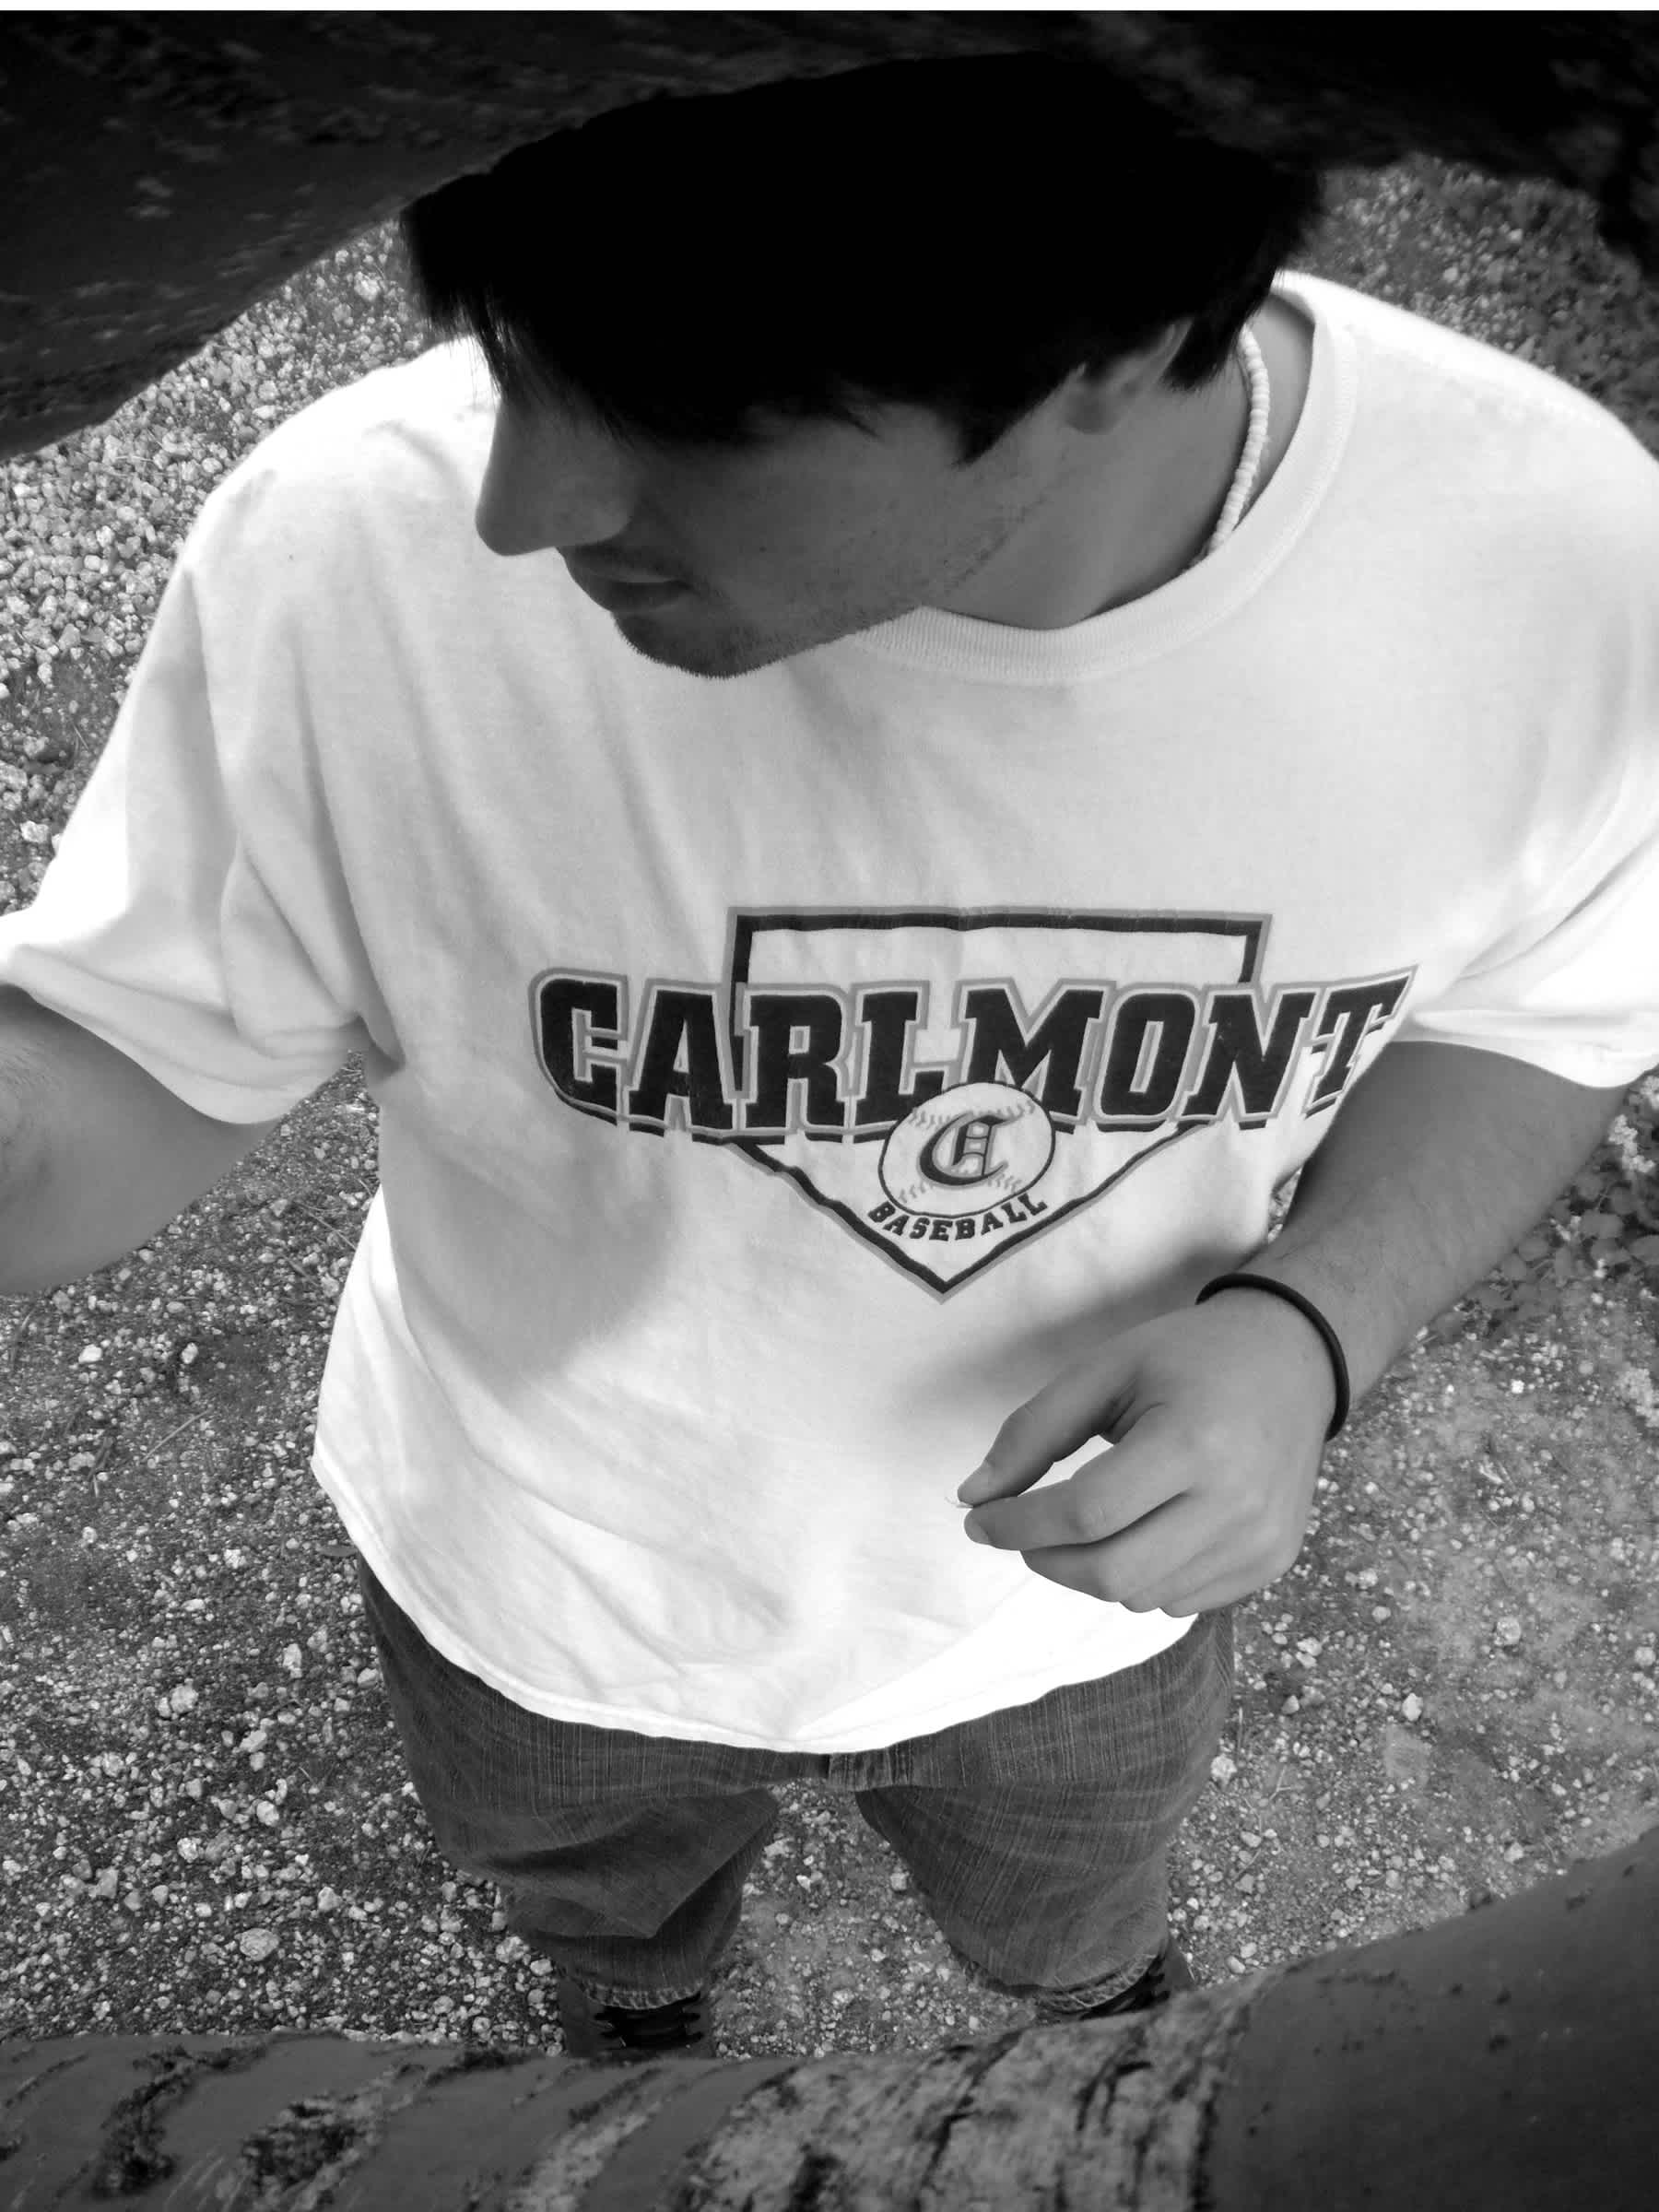 Black and white boy in Carlmont t-shirt looking to the side. 